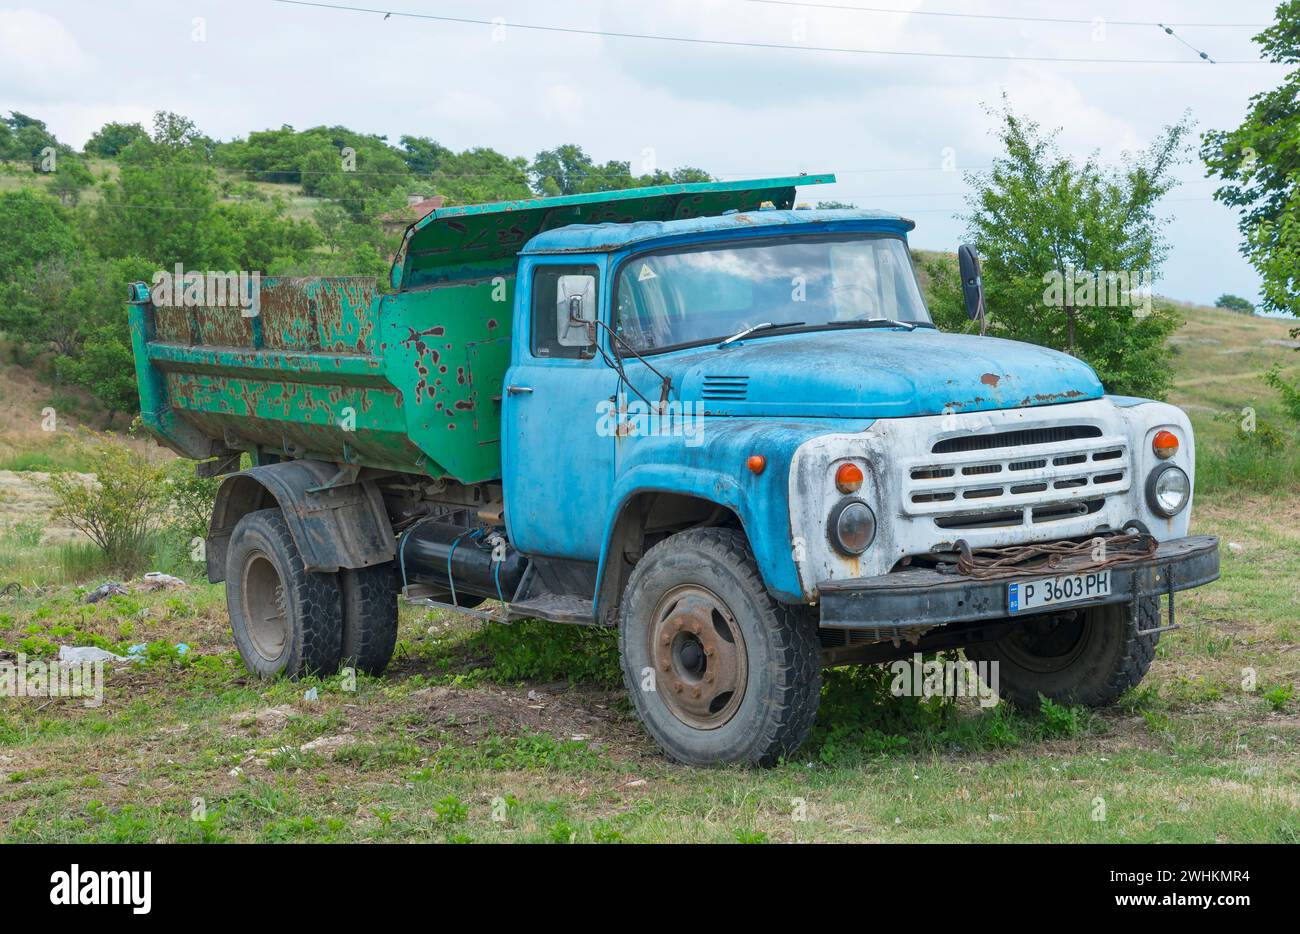 Weathered blue lorry on a rural meadow under a cloudy sky, ZIL-130, Soviet Russian vehicle manufacturer Savod imeni Likhachova, Basarbovo, Basarbovo Stock Photo